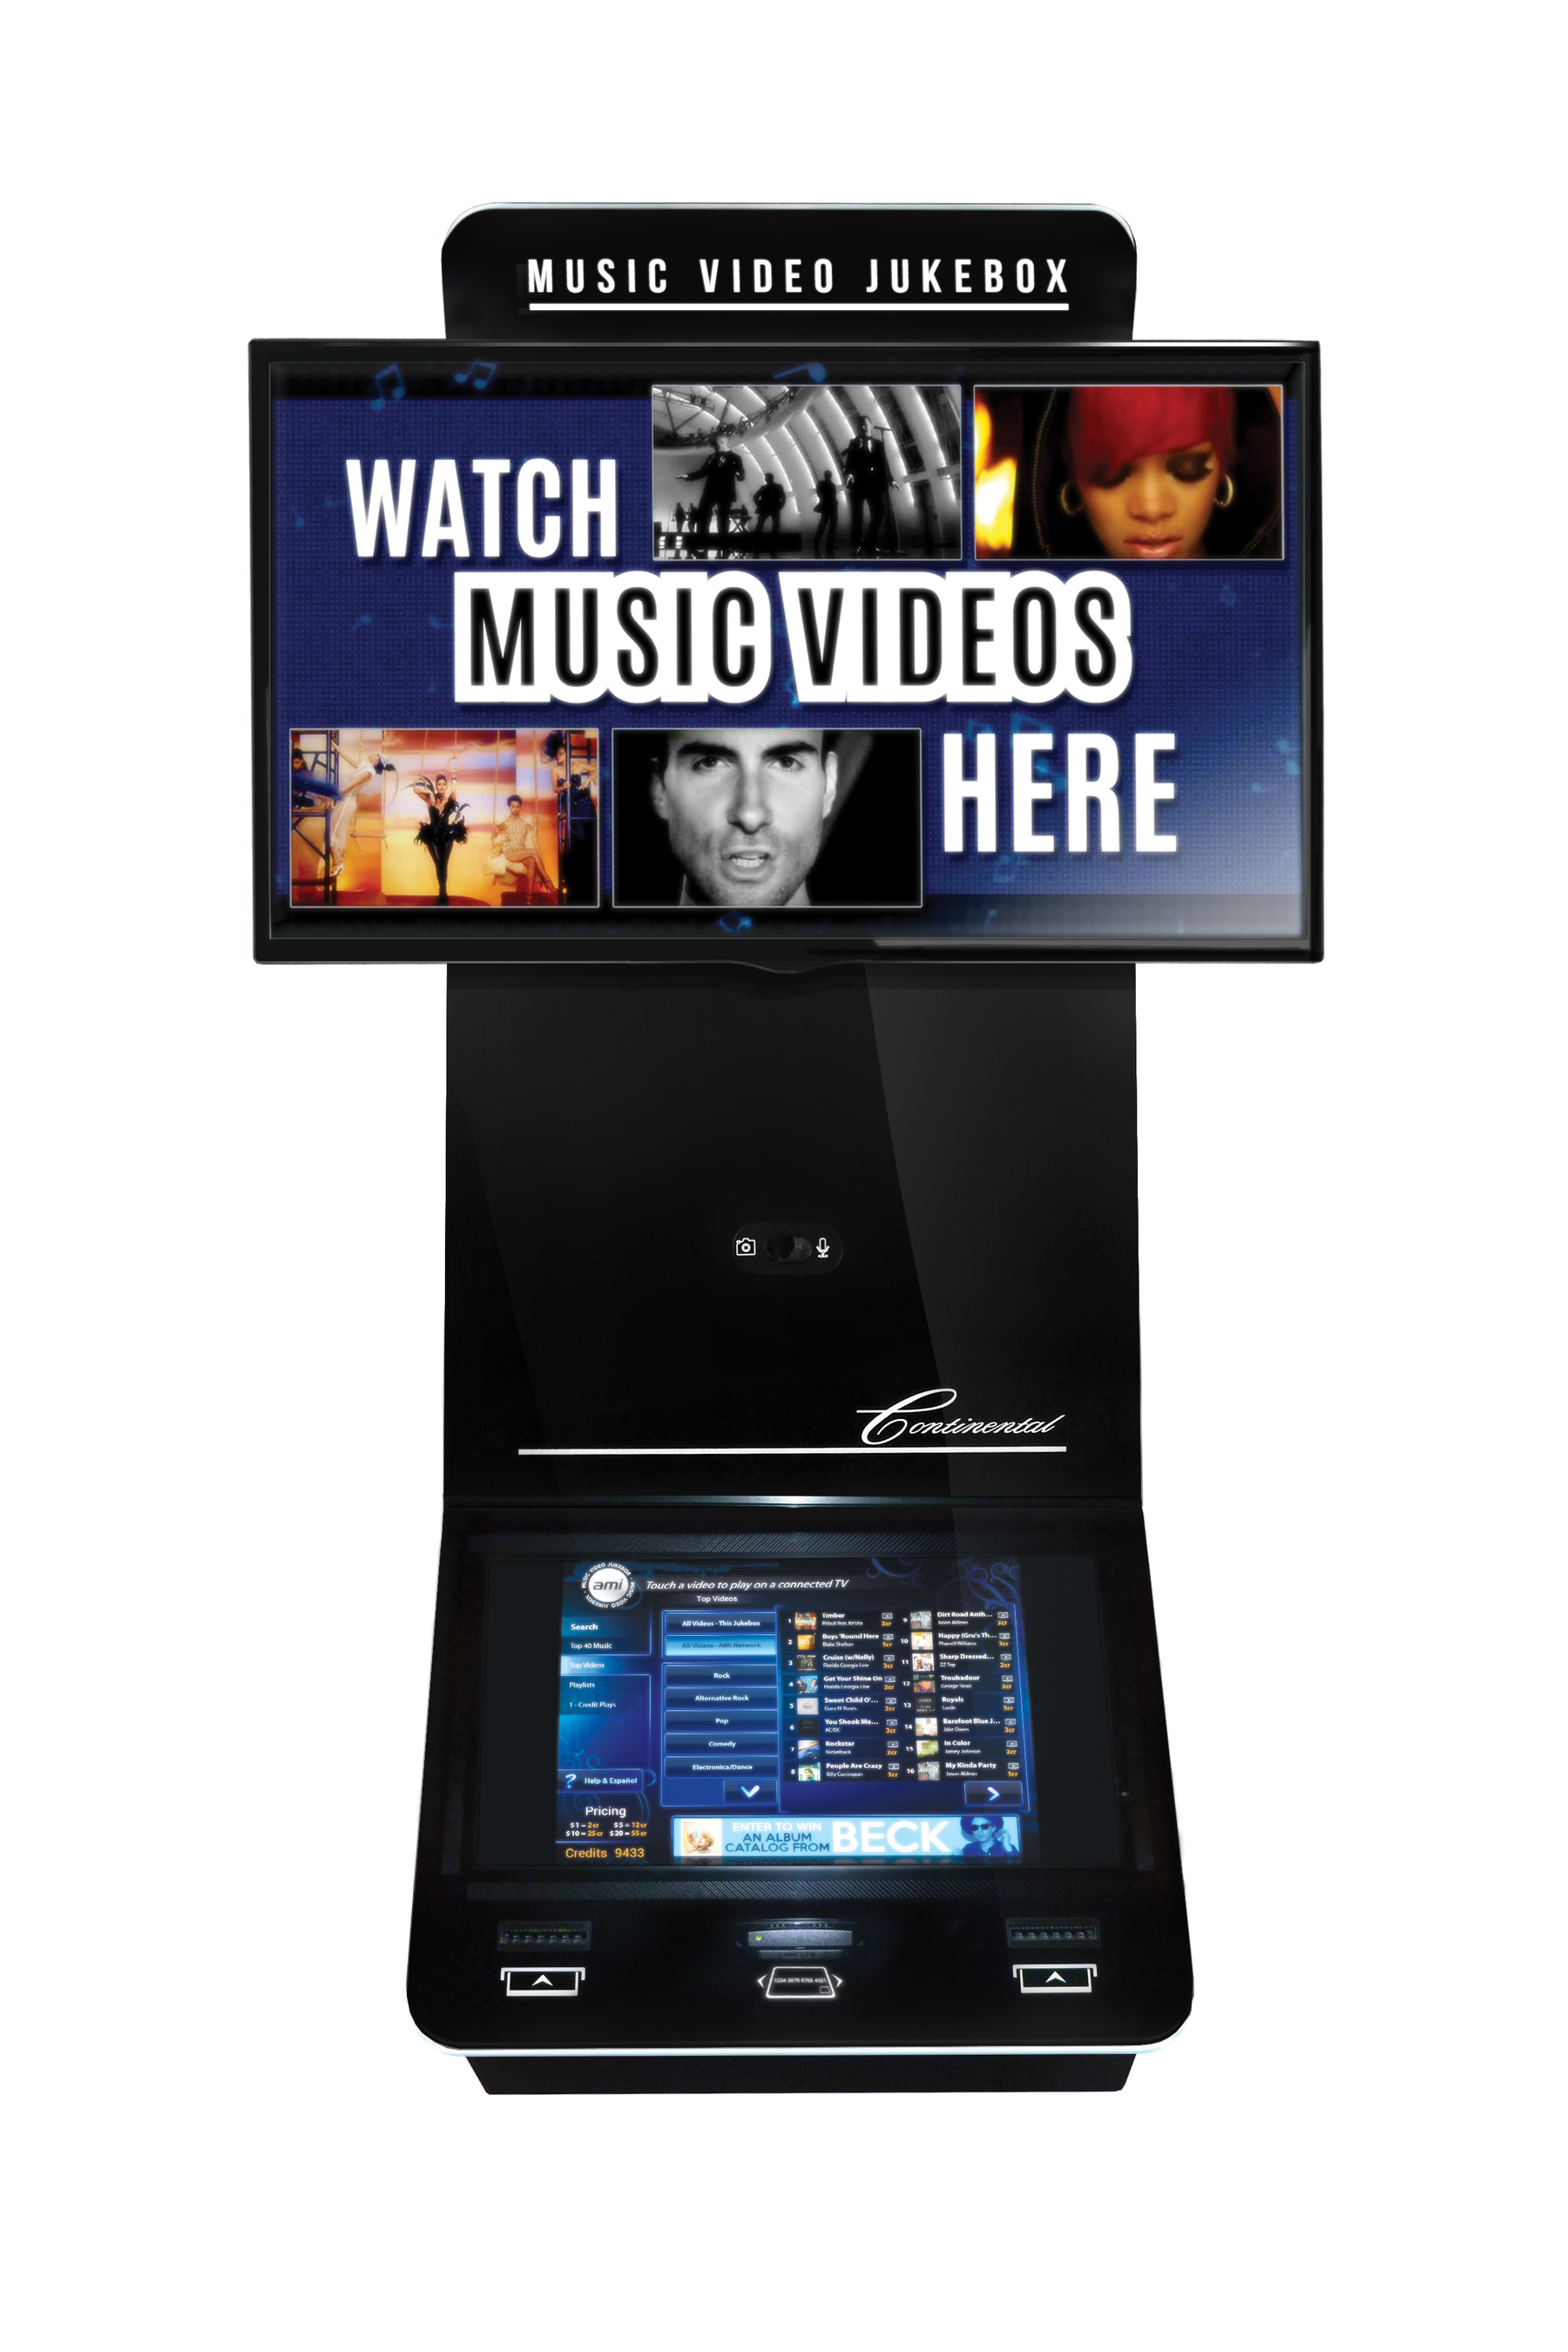 The new AMI Continental Jukebox offers a unique audio and music video experience. (PRNewsFoto/AMI Entertainment Network)